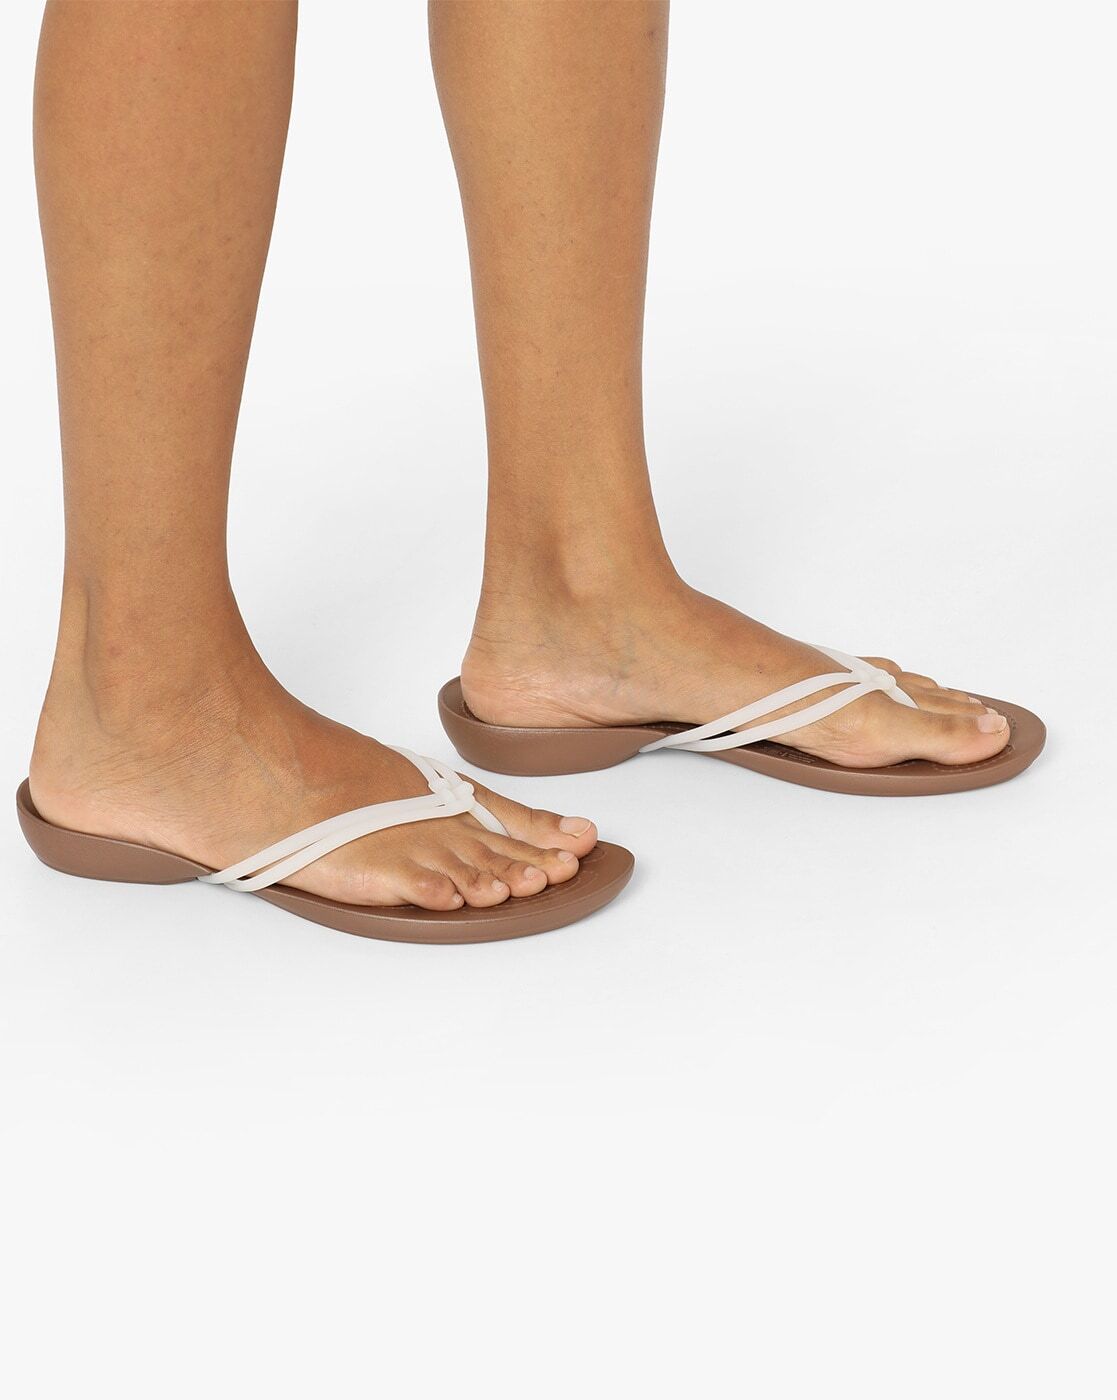 Buy White & Brown Flat Sandals for Women by CROCS Online 